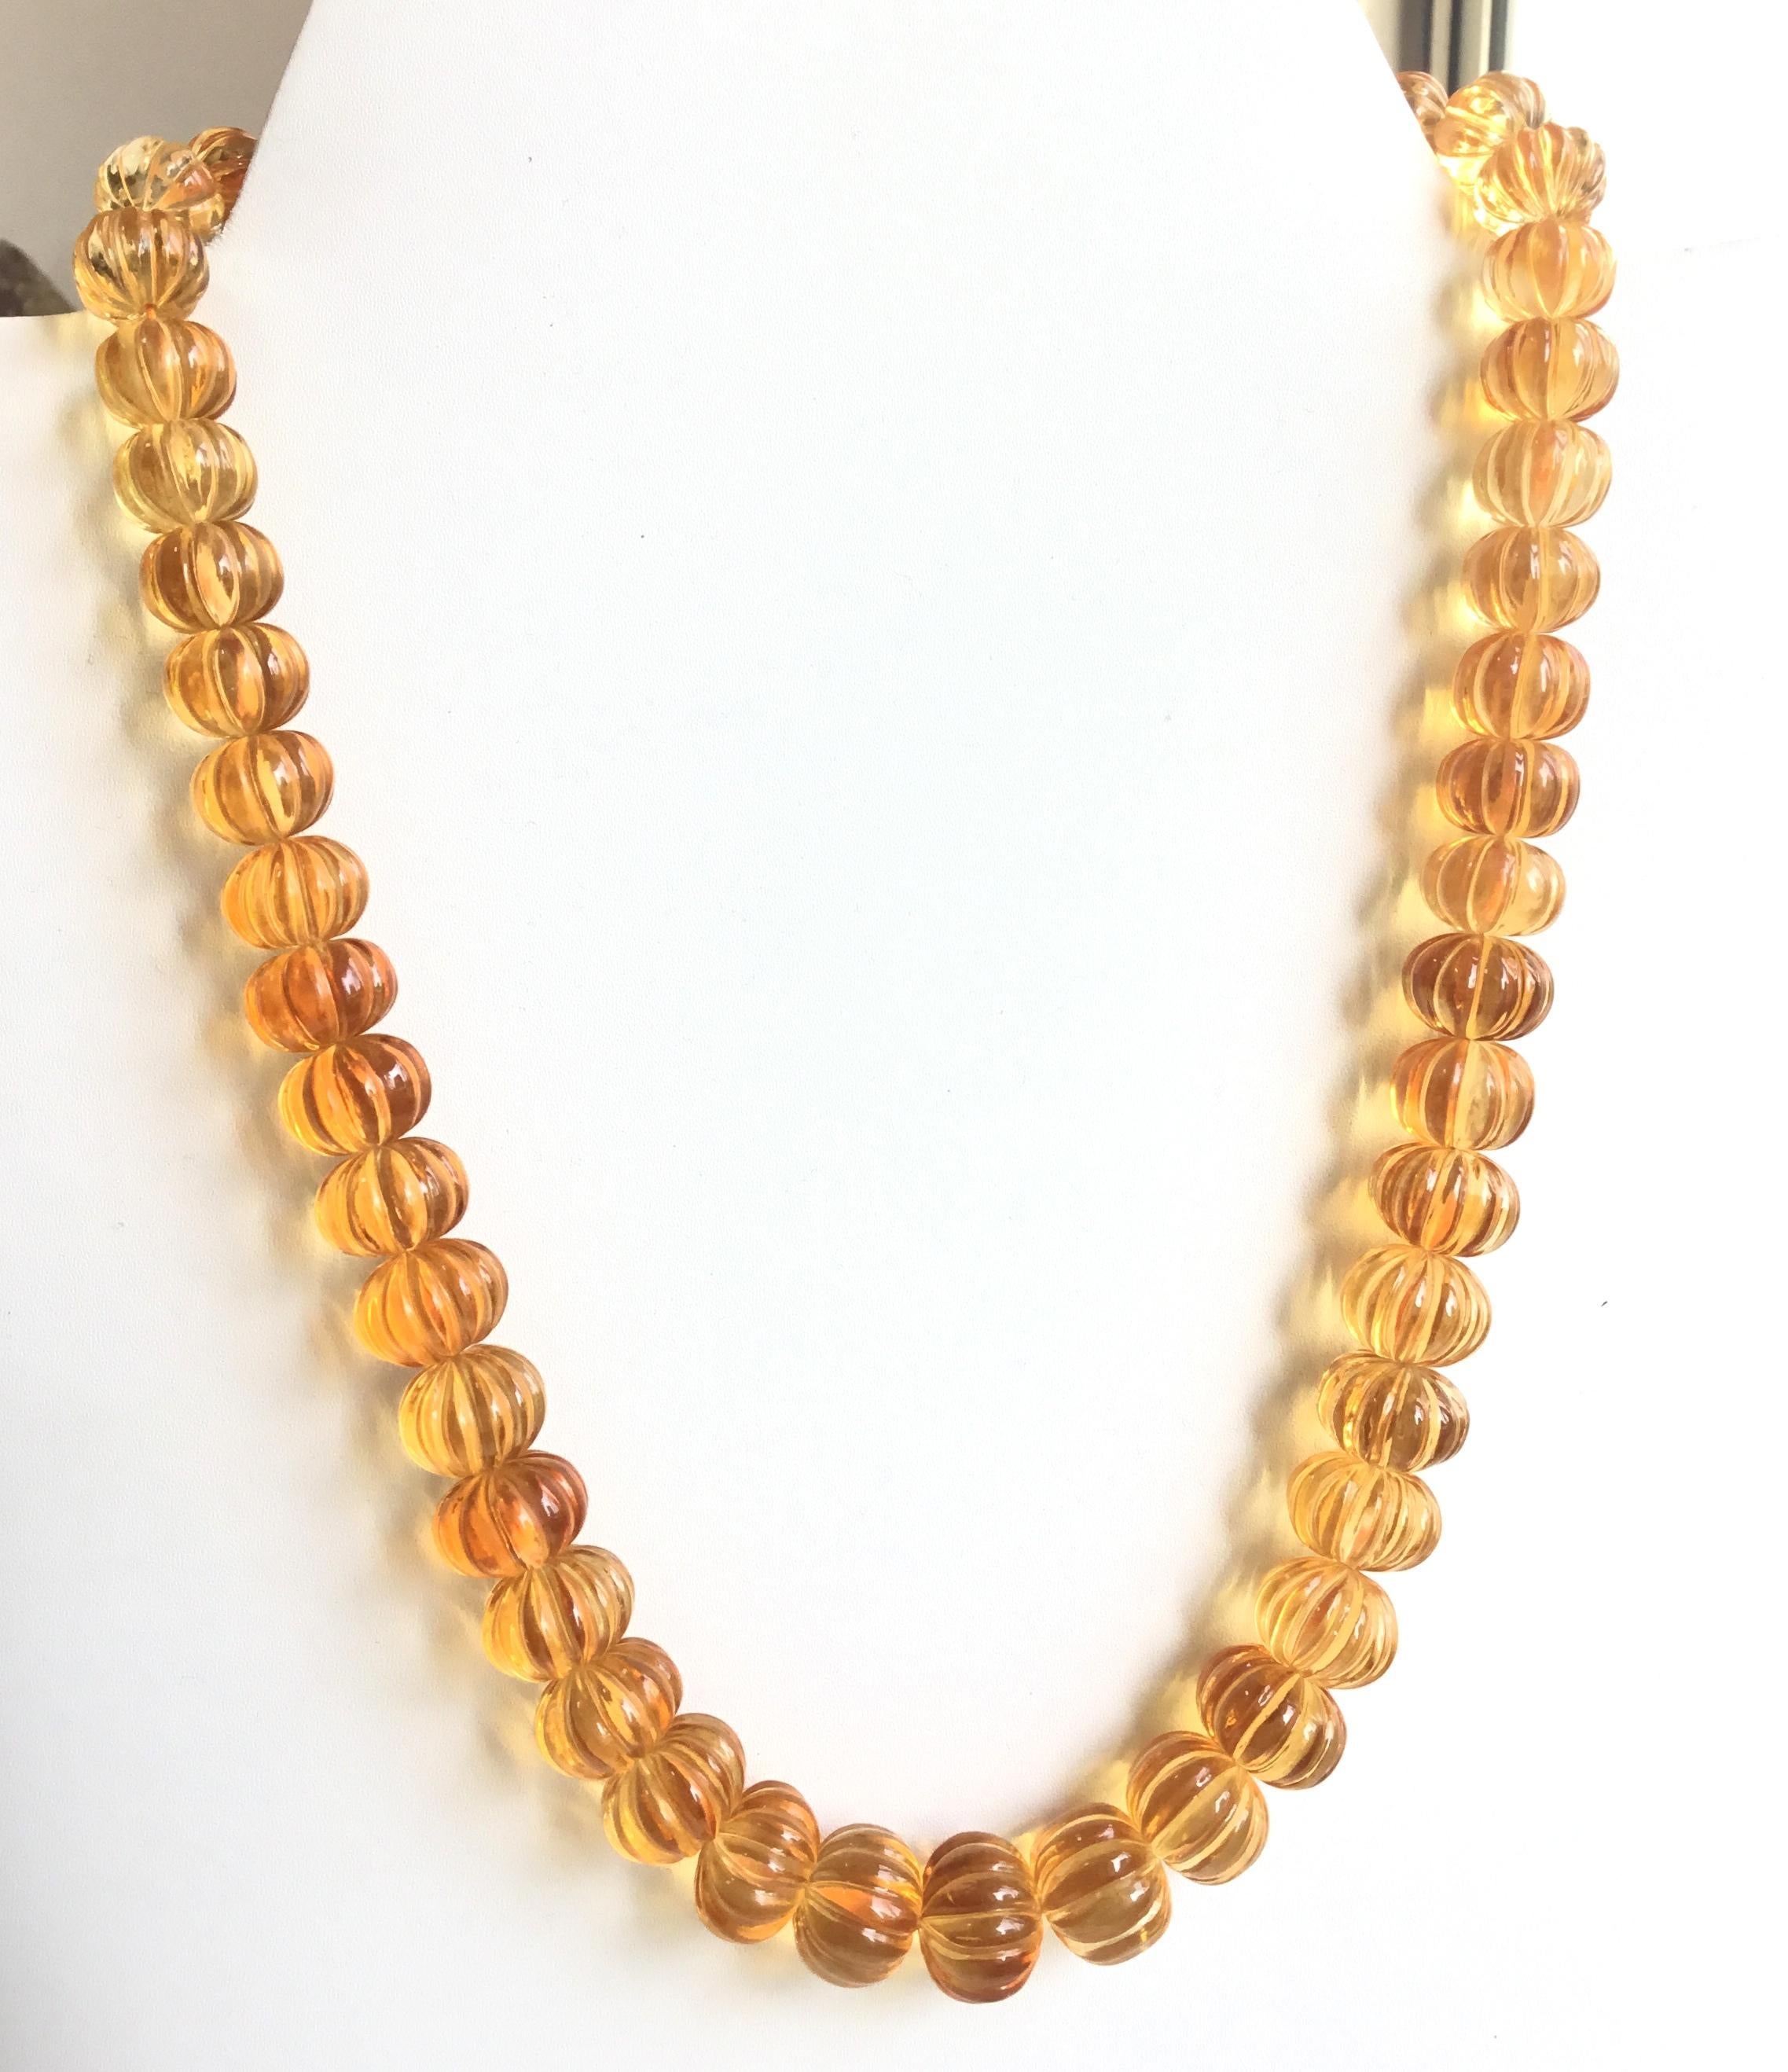 Top Quality Citrine Carved Melon Beads Natural Gemstone Necklace For Sale 2